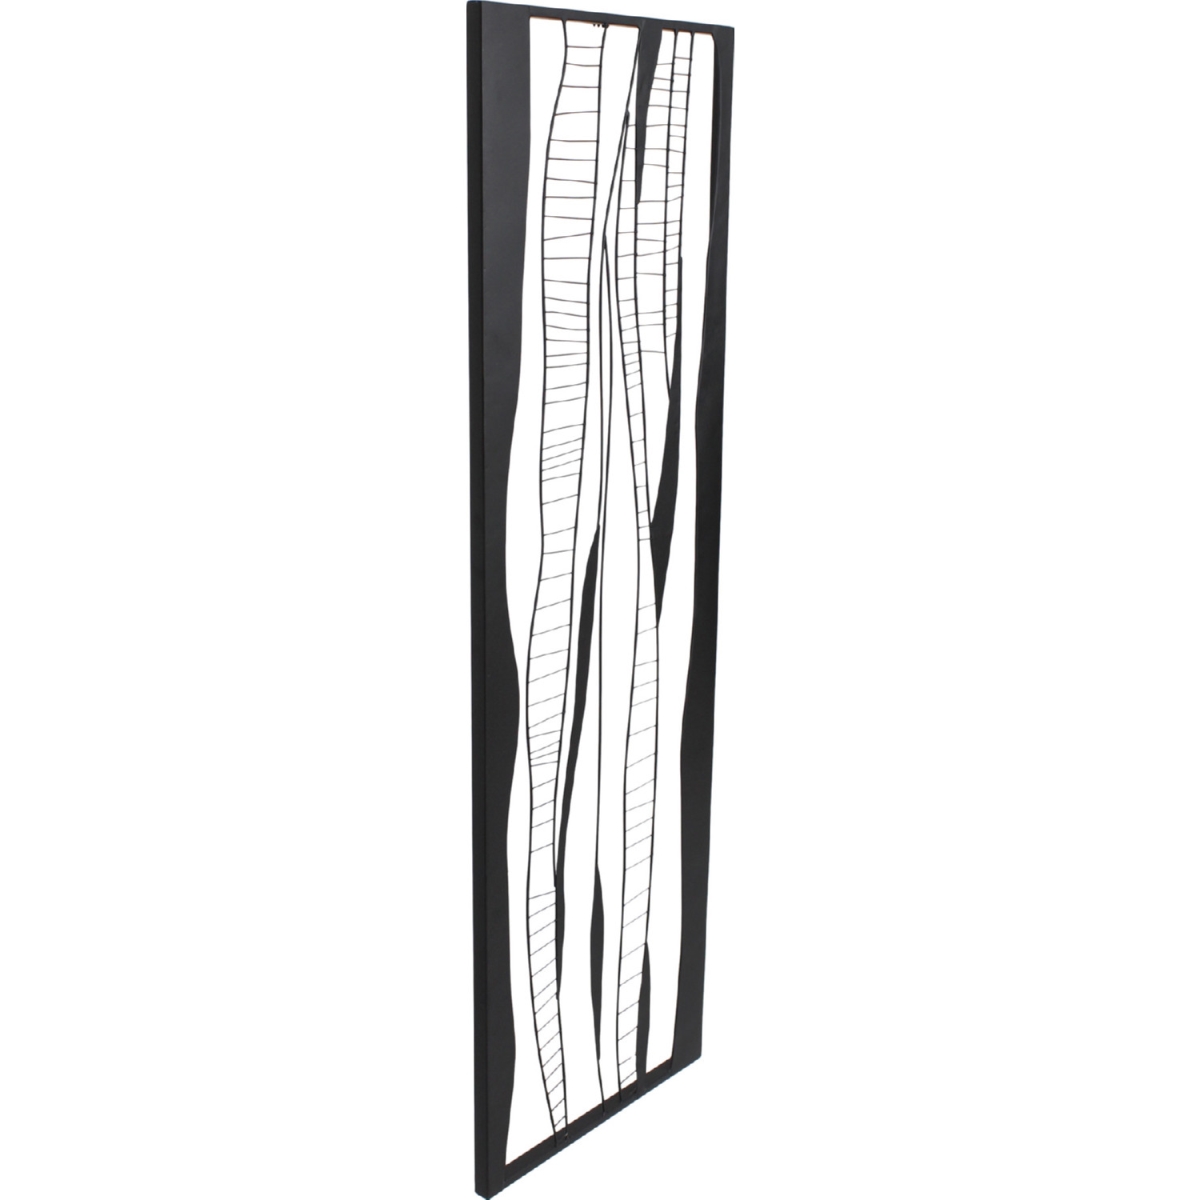 Ty-1033-02 Metal Waves 2 Wall Decor Sculptures - Black, 47.25 X 15 X 1 In.